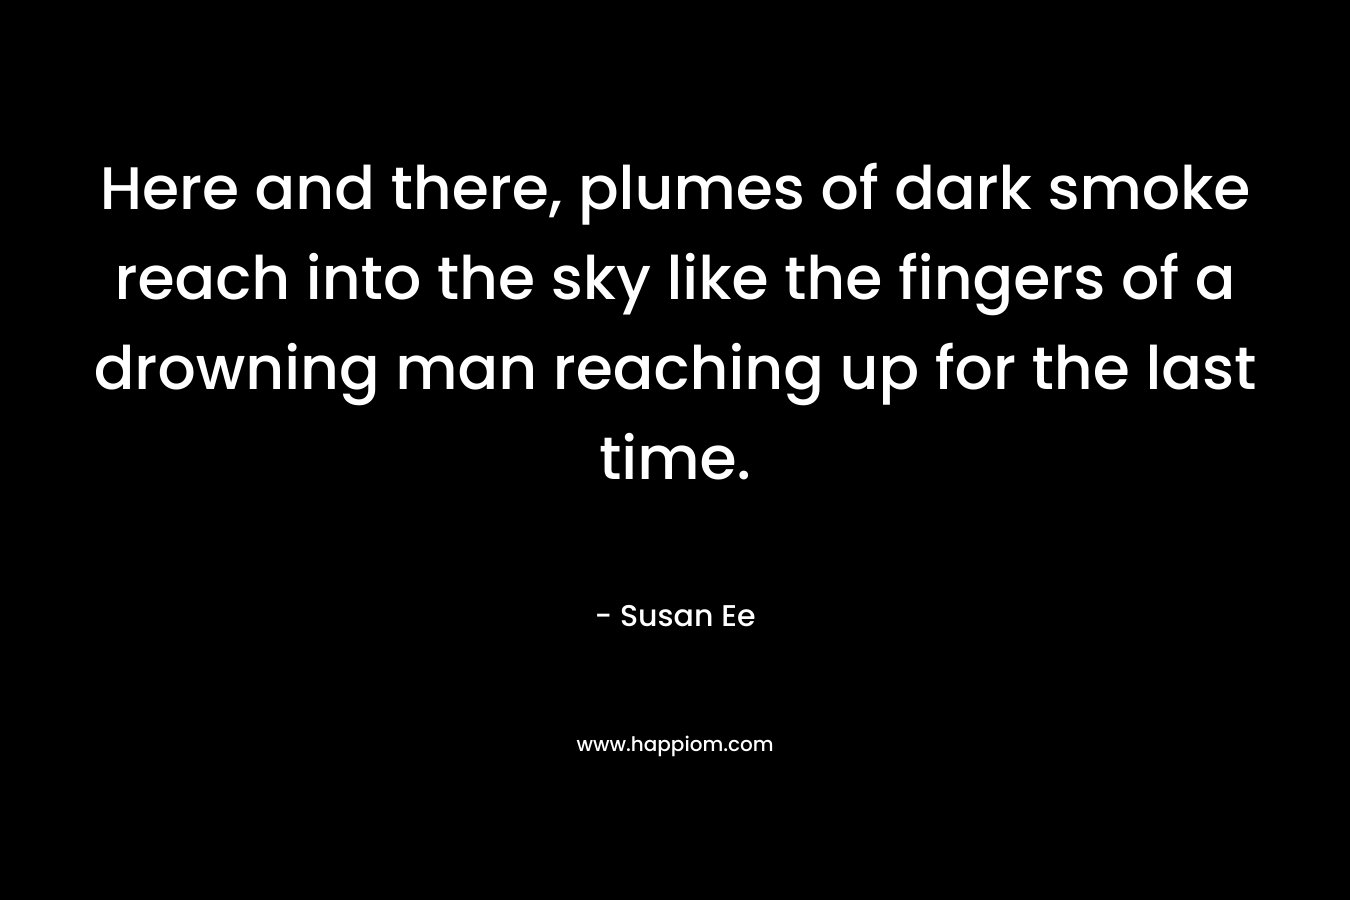 Here and there, plumes of dark smoke reach into the sky like the fingers of a drowning man reaching up for the last time. – Susan Ee